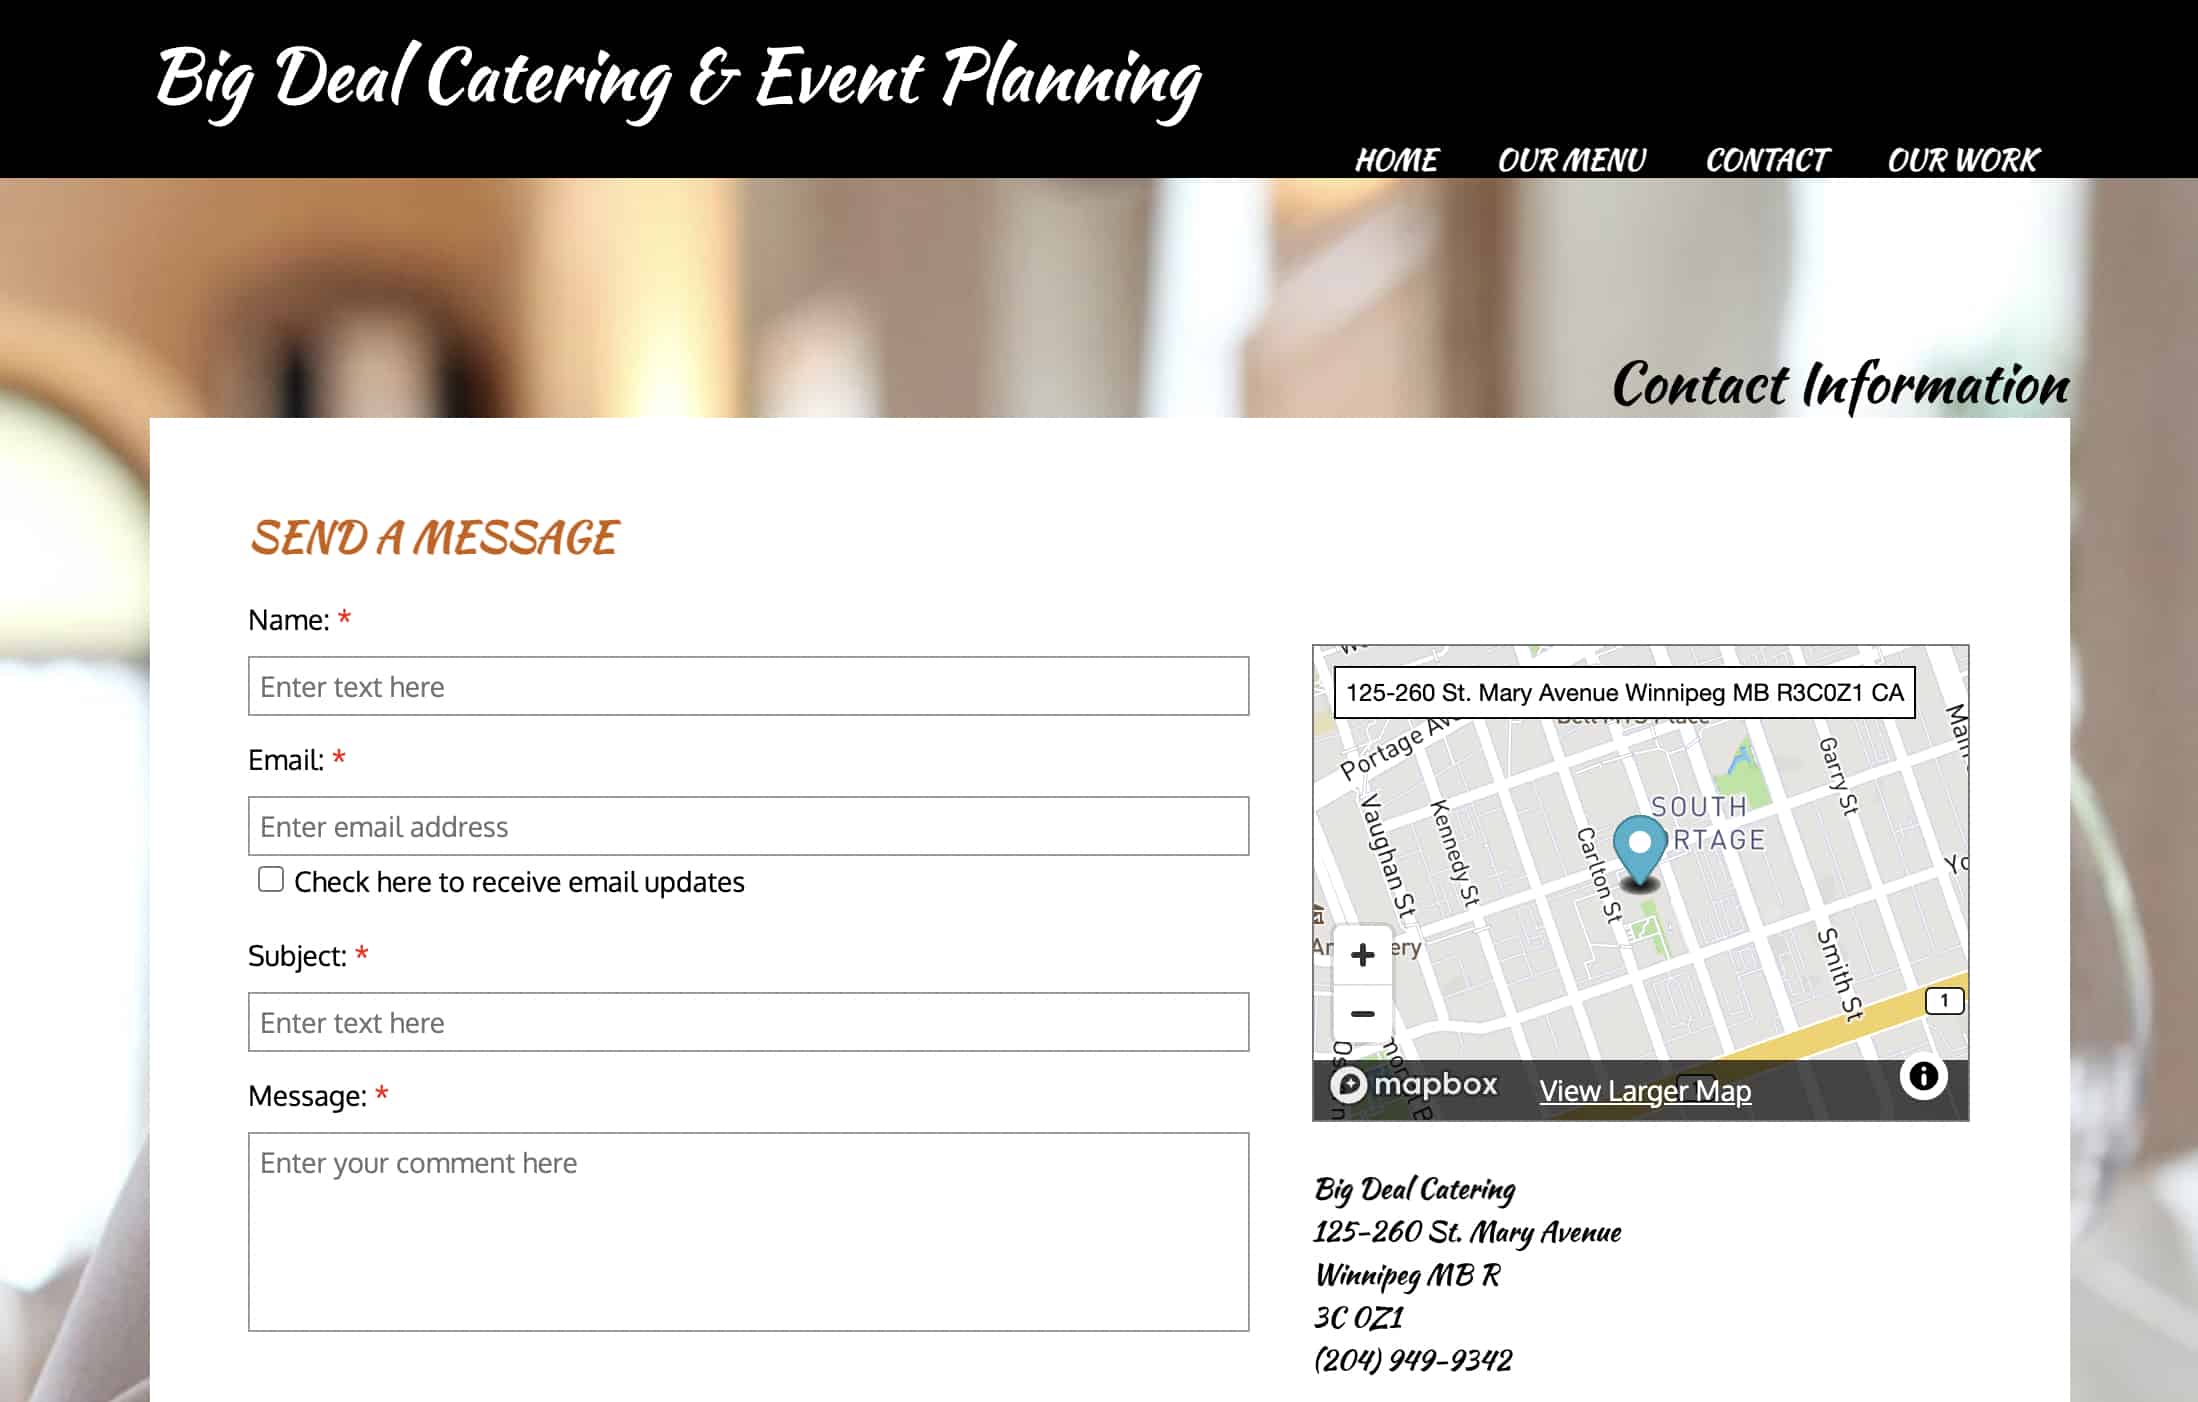 Big Deal Catering & Event Planning